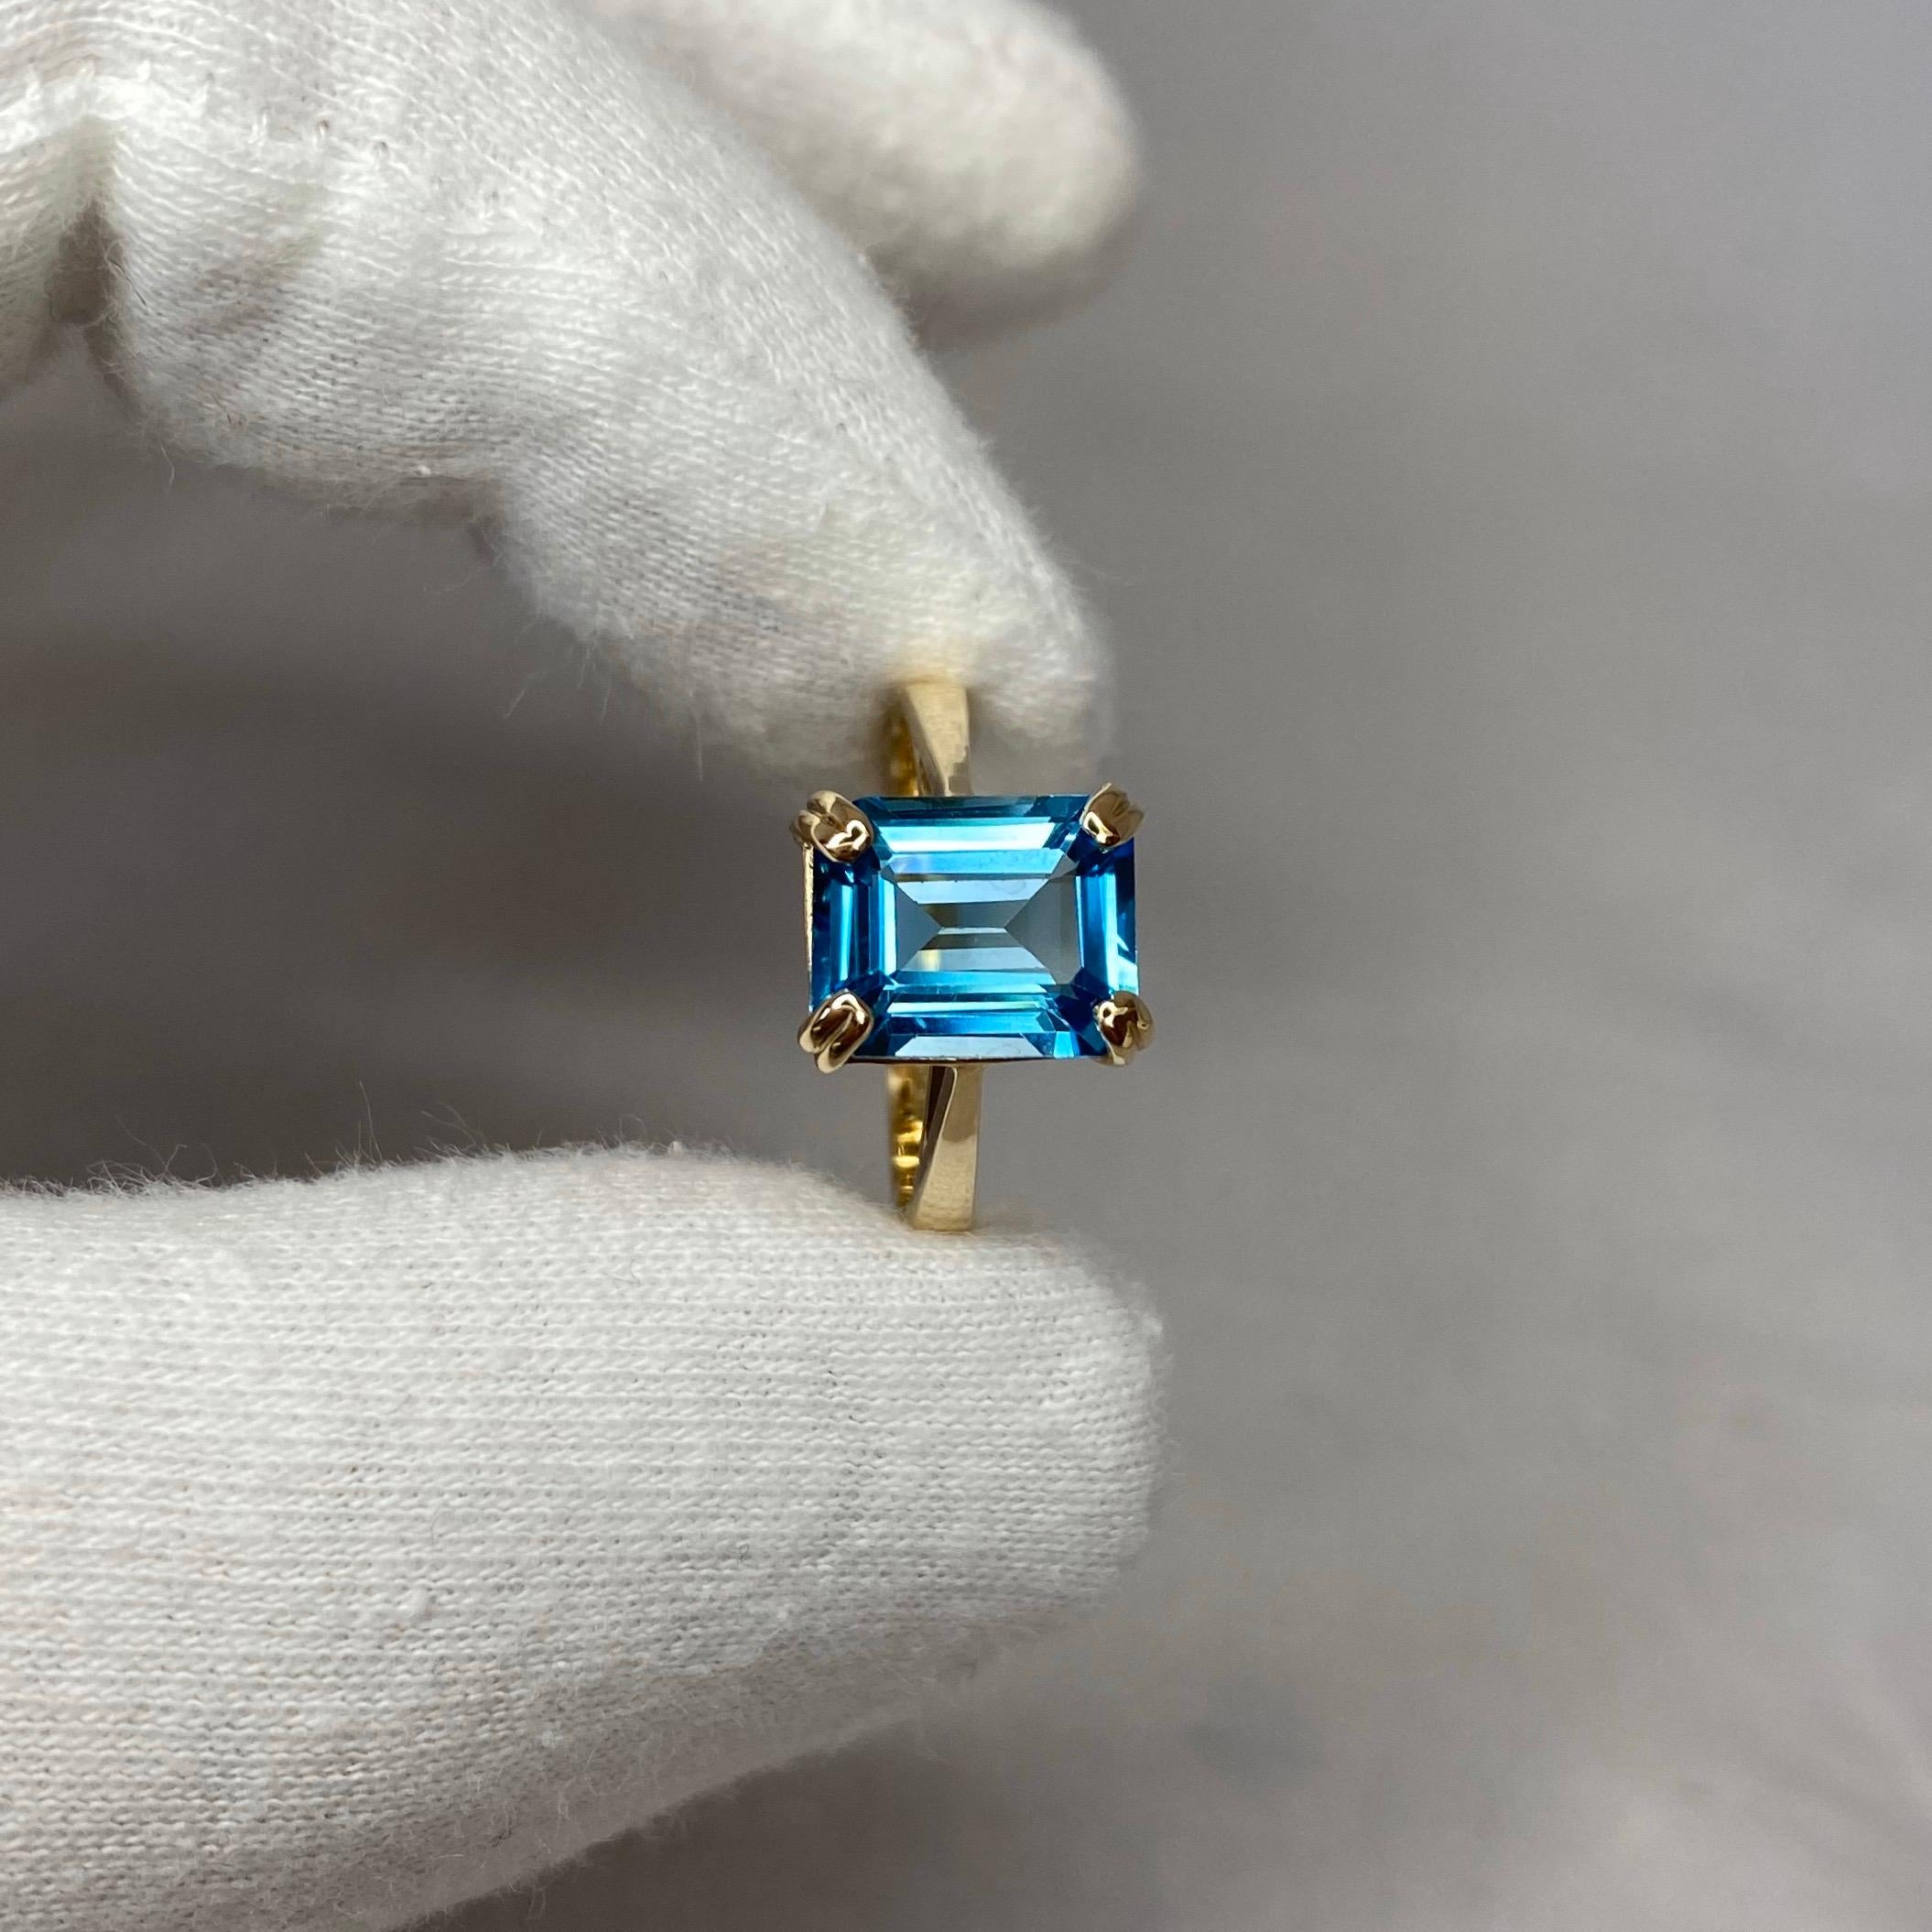 Fine Swiss blue topaz solitaire ring.

3.50 carat Swiss blue topaz with a stunning bright blue colour and excellent clarity. Very clean, top quality stone. Also has an excellent quality emerald cut which shows the fine colour to best effect.
Set in